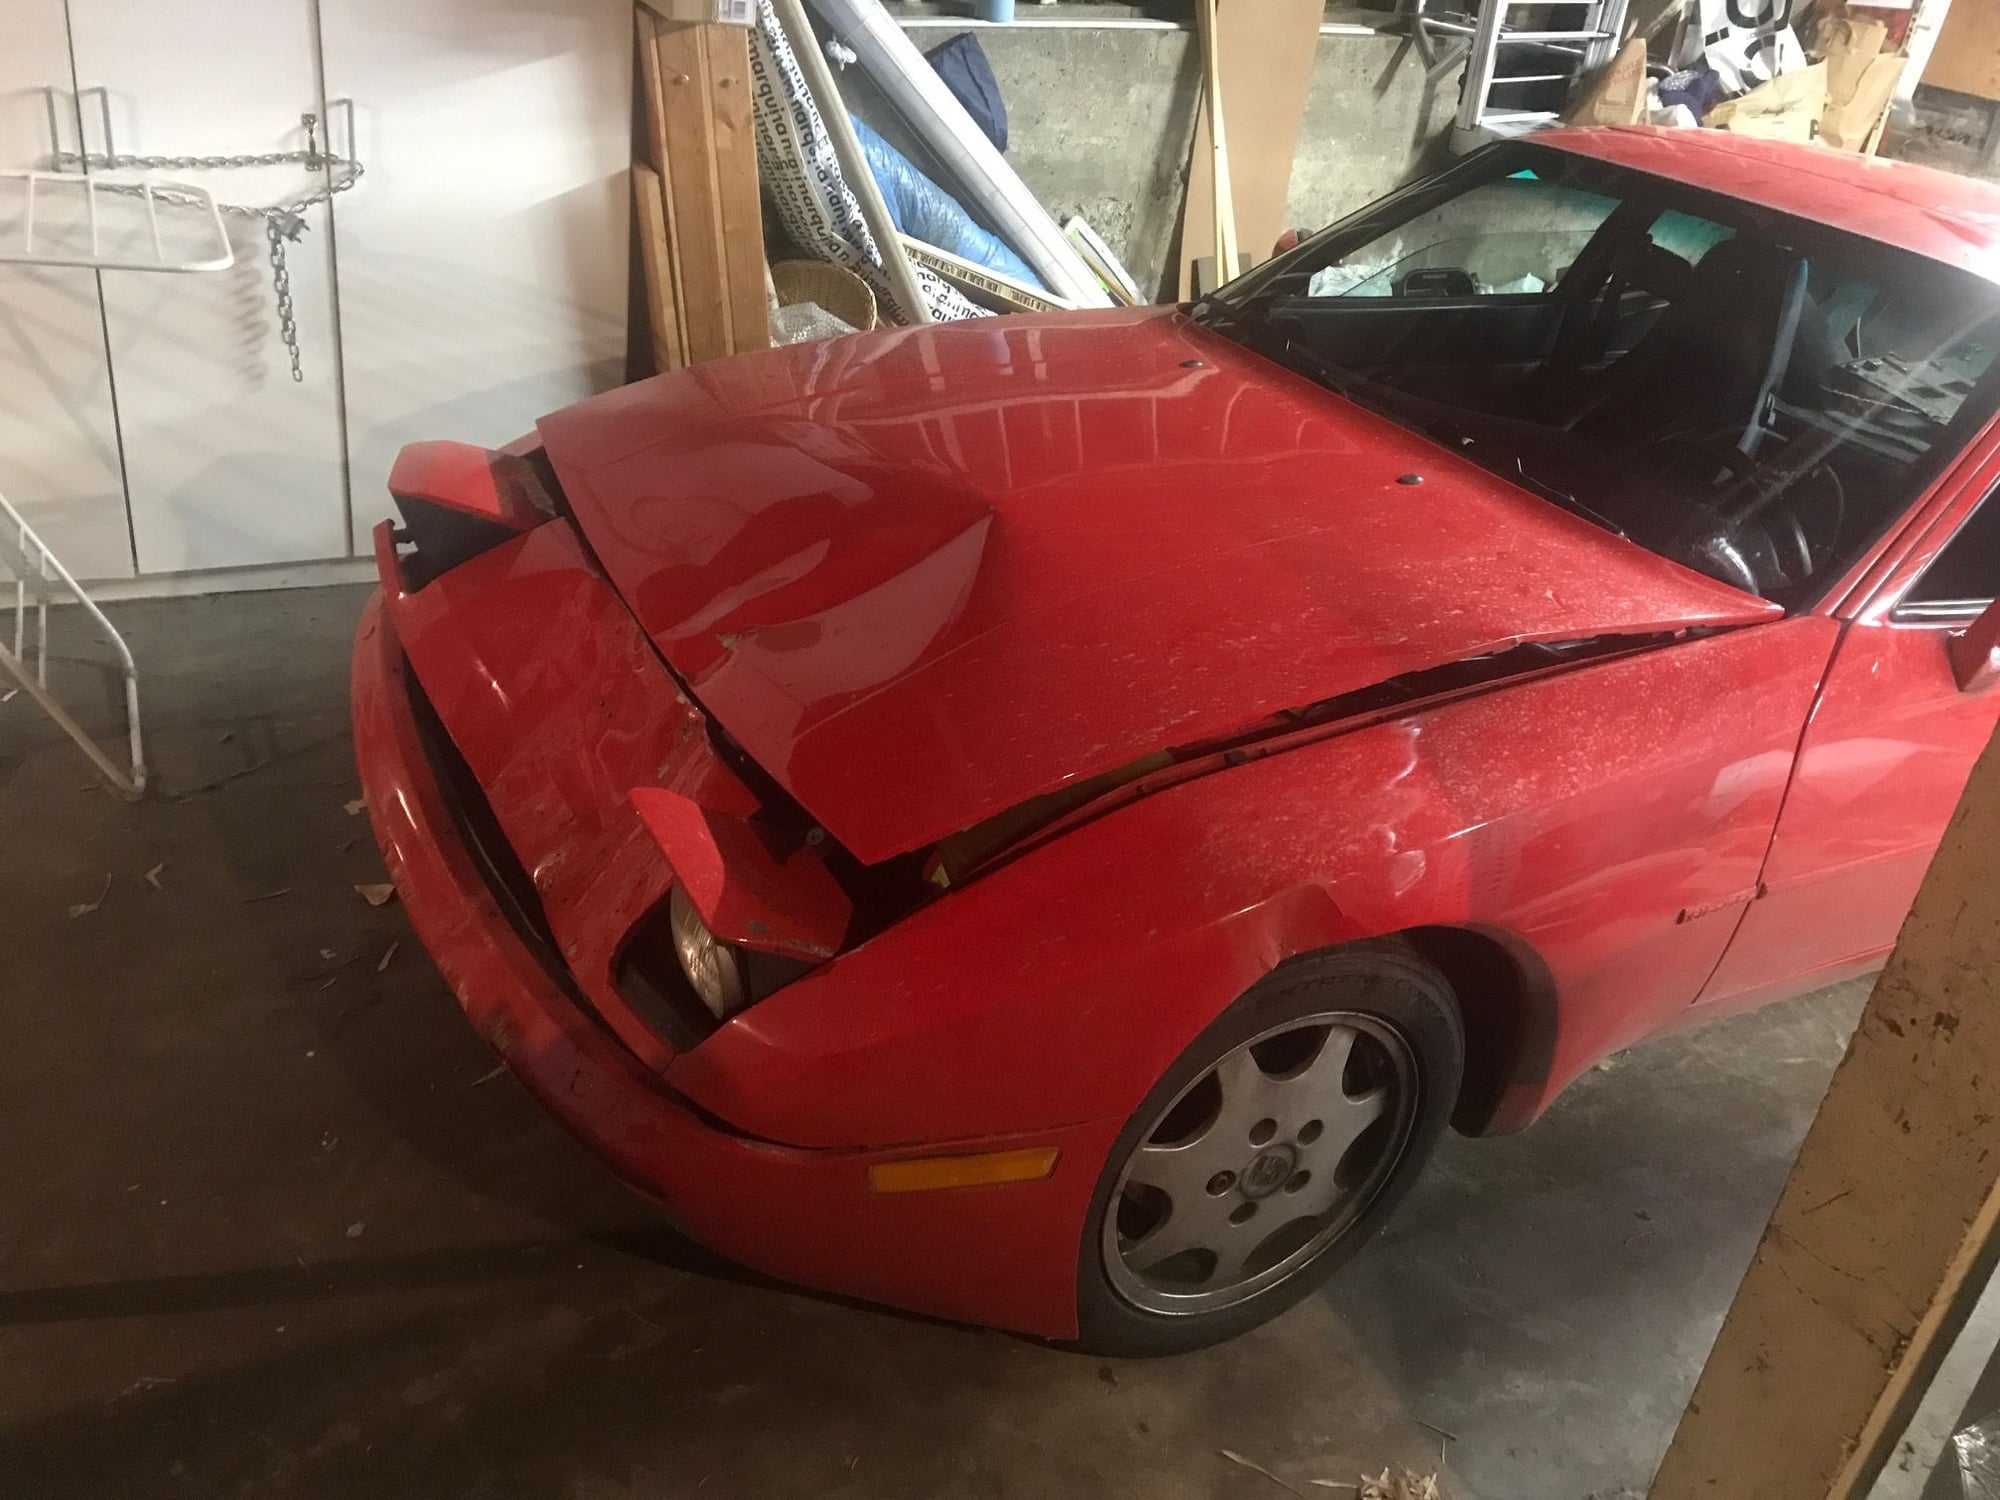 1990 Porsche 944 - Crash damaged 1990 944 S2 - Used - VIN WP0AB2943LN450281 - 122,738 Miles - 4 cyl - 2WD - Manual - Coupe - Red - San Francisco, CA 94114, United States